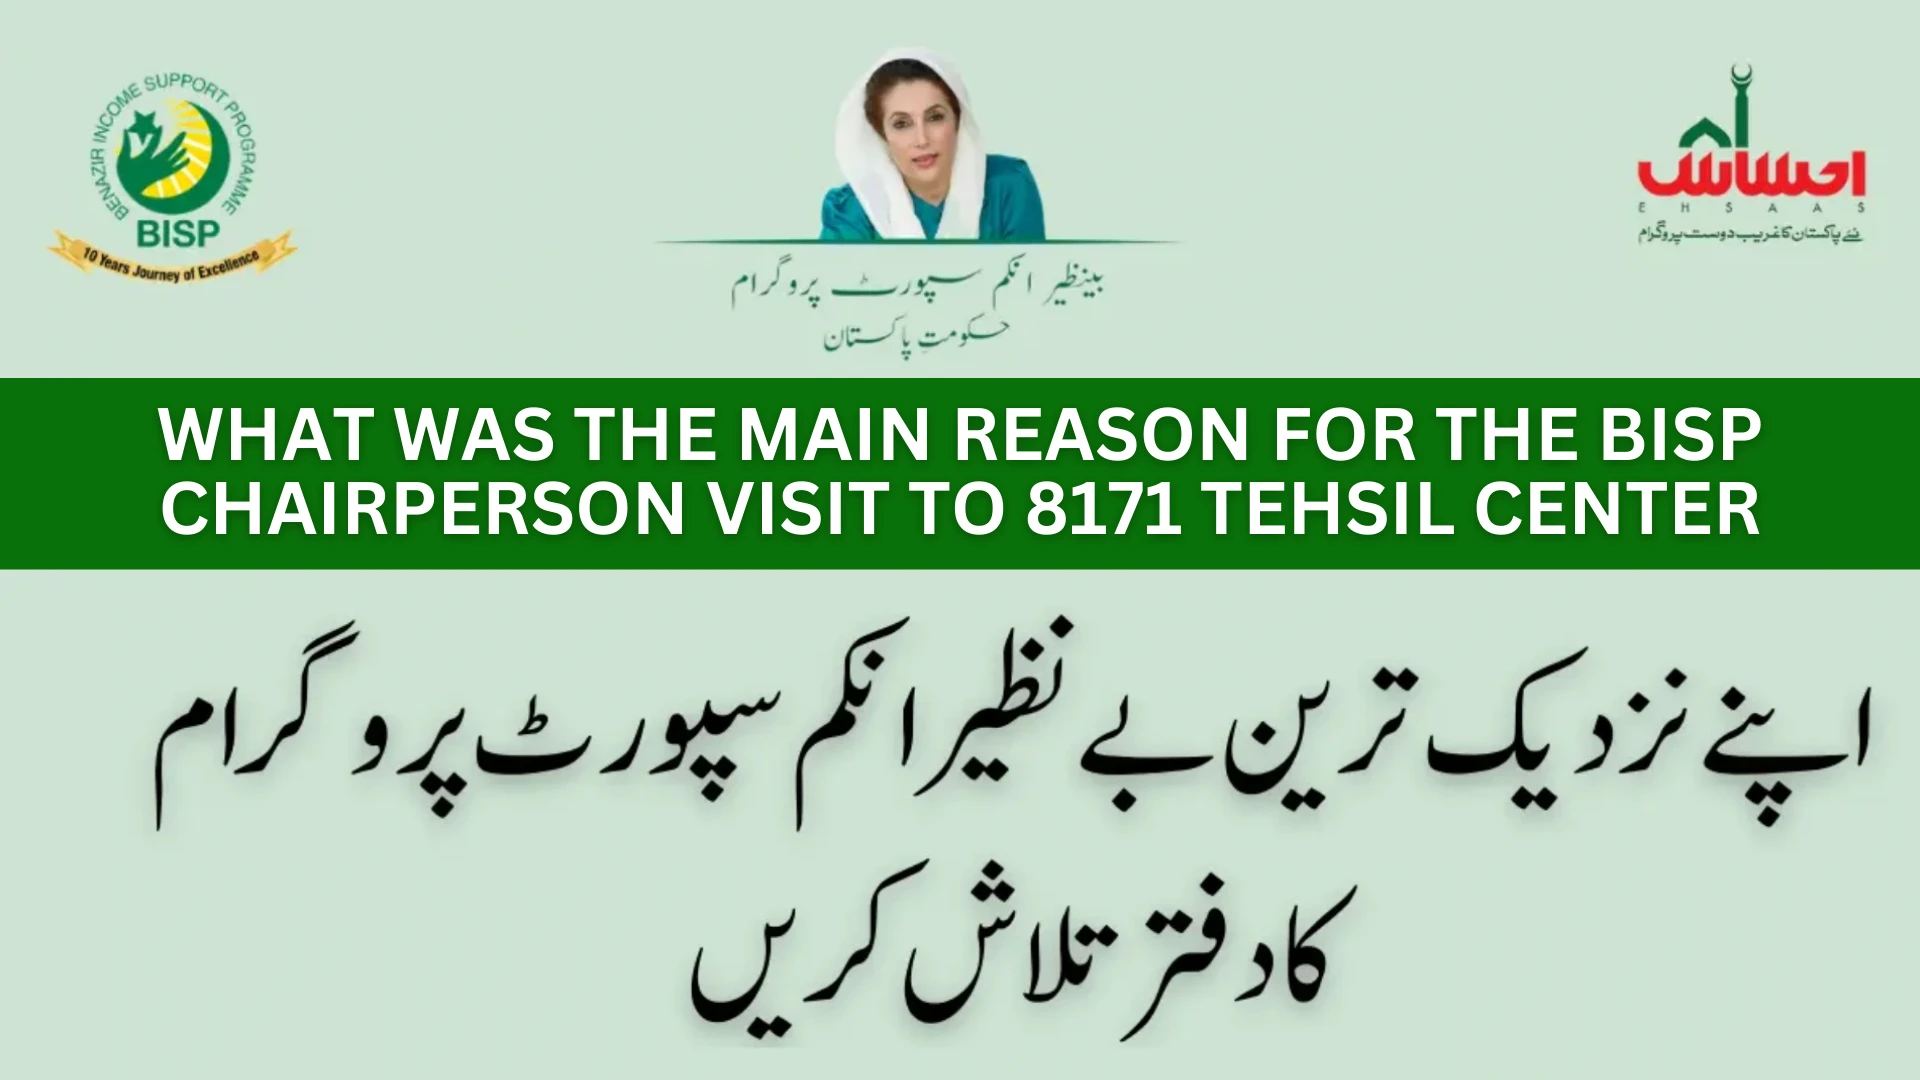 What was the main Reason for The BISP Chairperson Visit To 8171 Tehsil Center